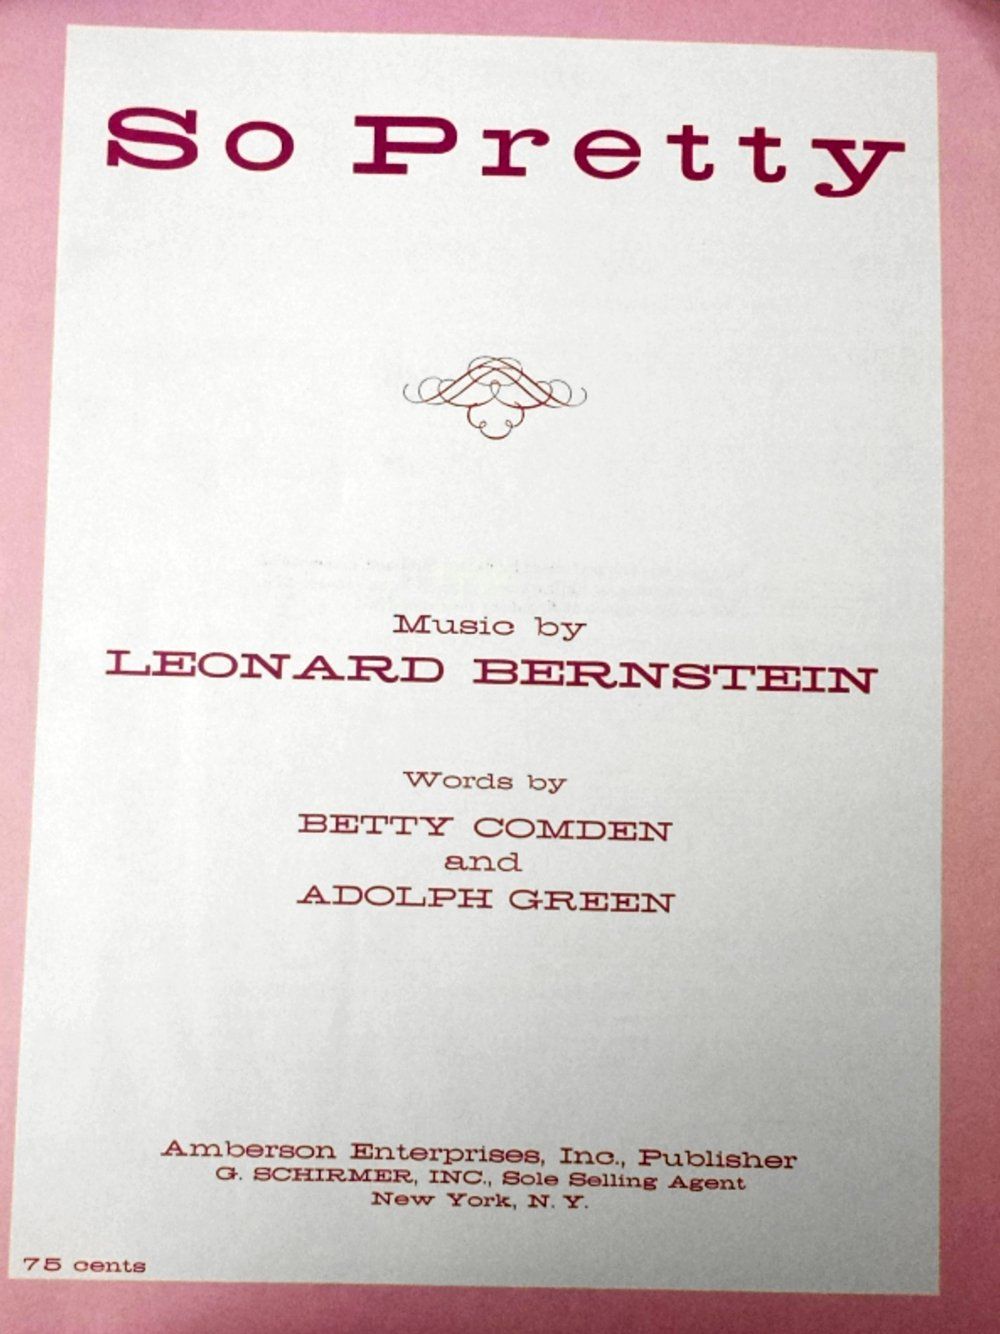 Cover of the sheet music to the song 